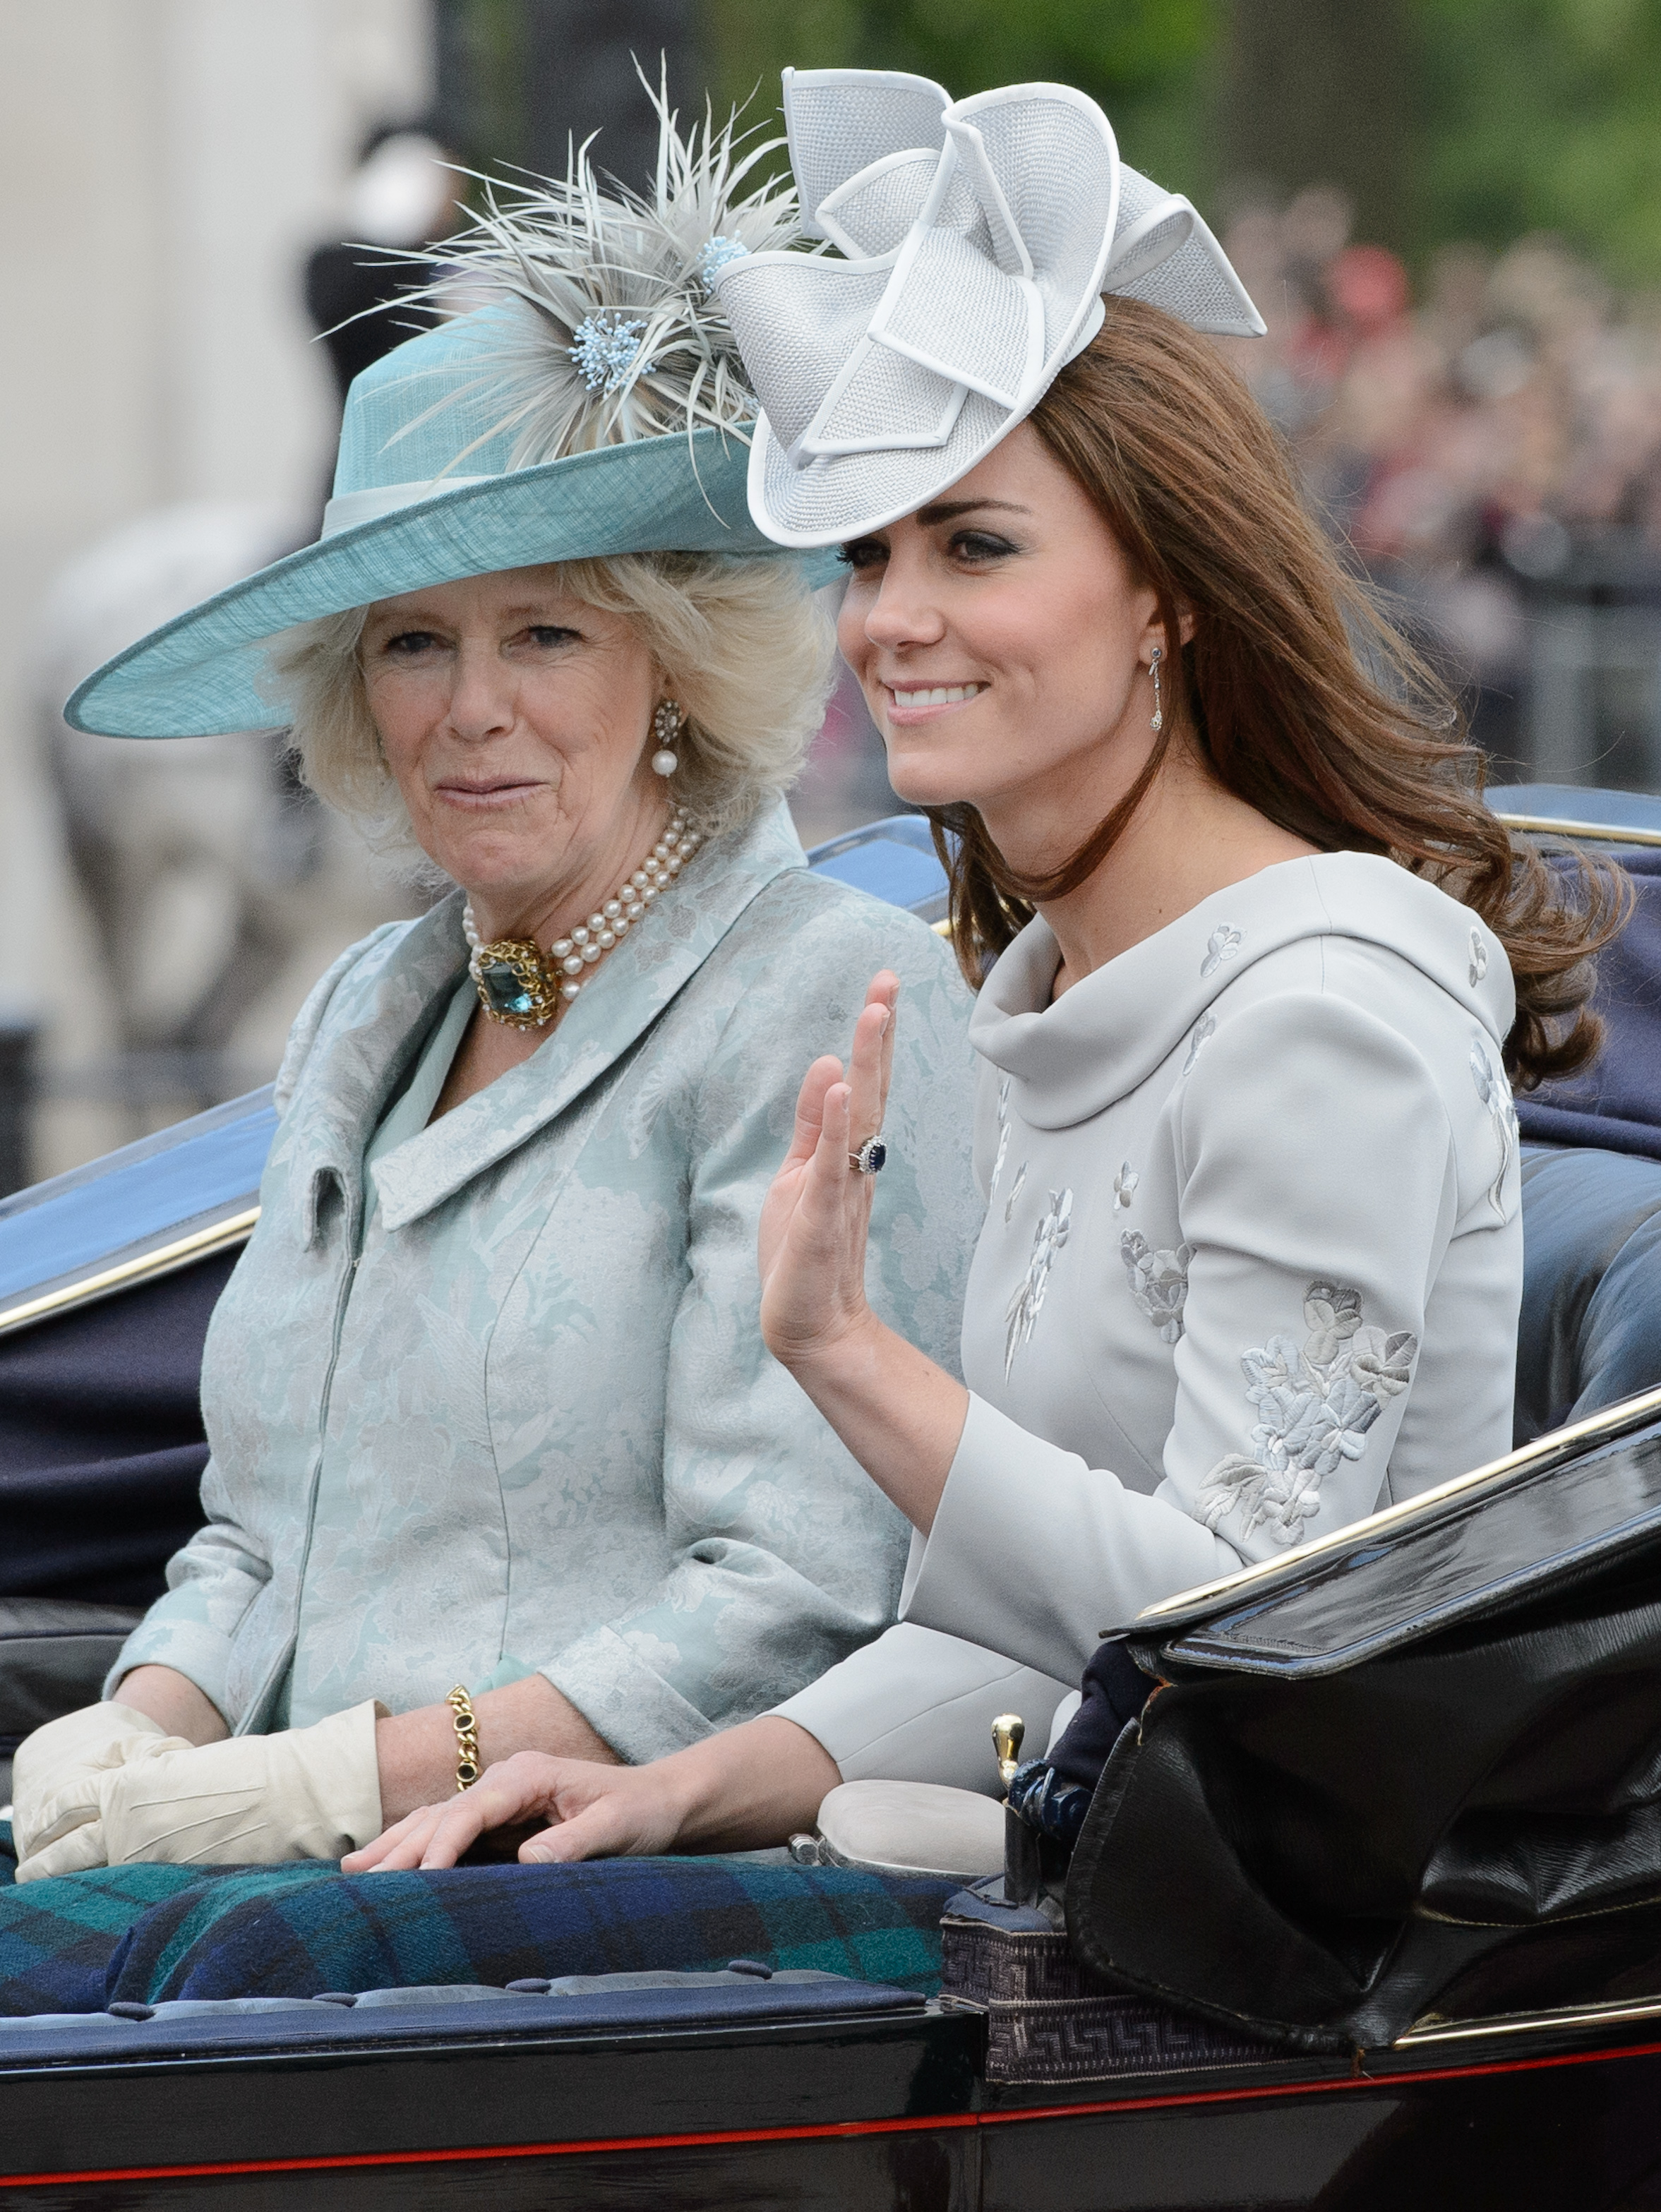 Blue Note
                              On June 16, 2012, Middleton wore a baby blue Erdem dress and matching Jane Corbett hat for the Trooping the Color ceremony in London. The annual event marks the official celebration of the Queen's birthday.